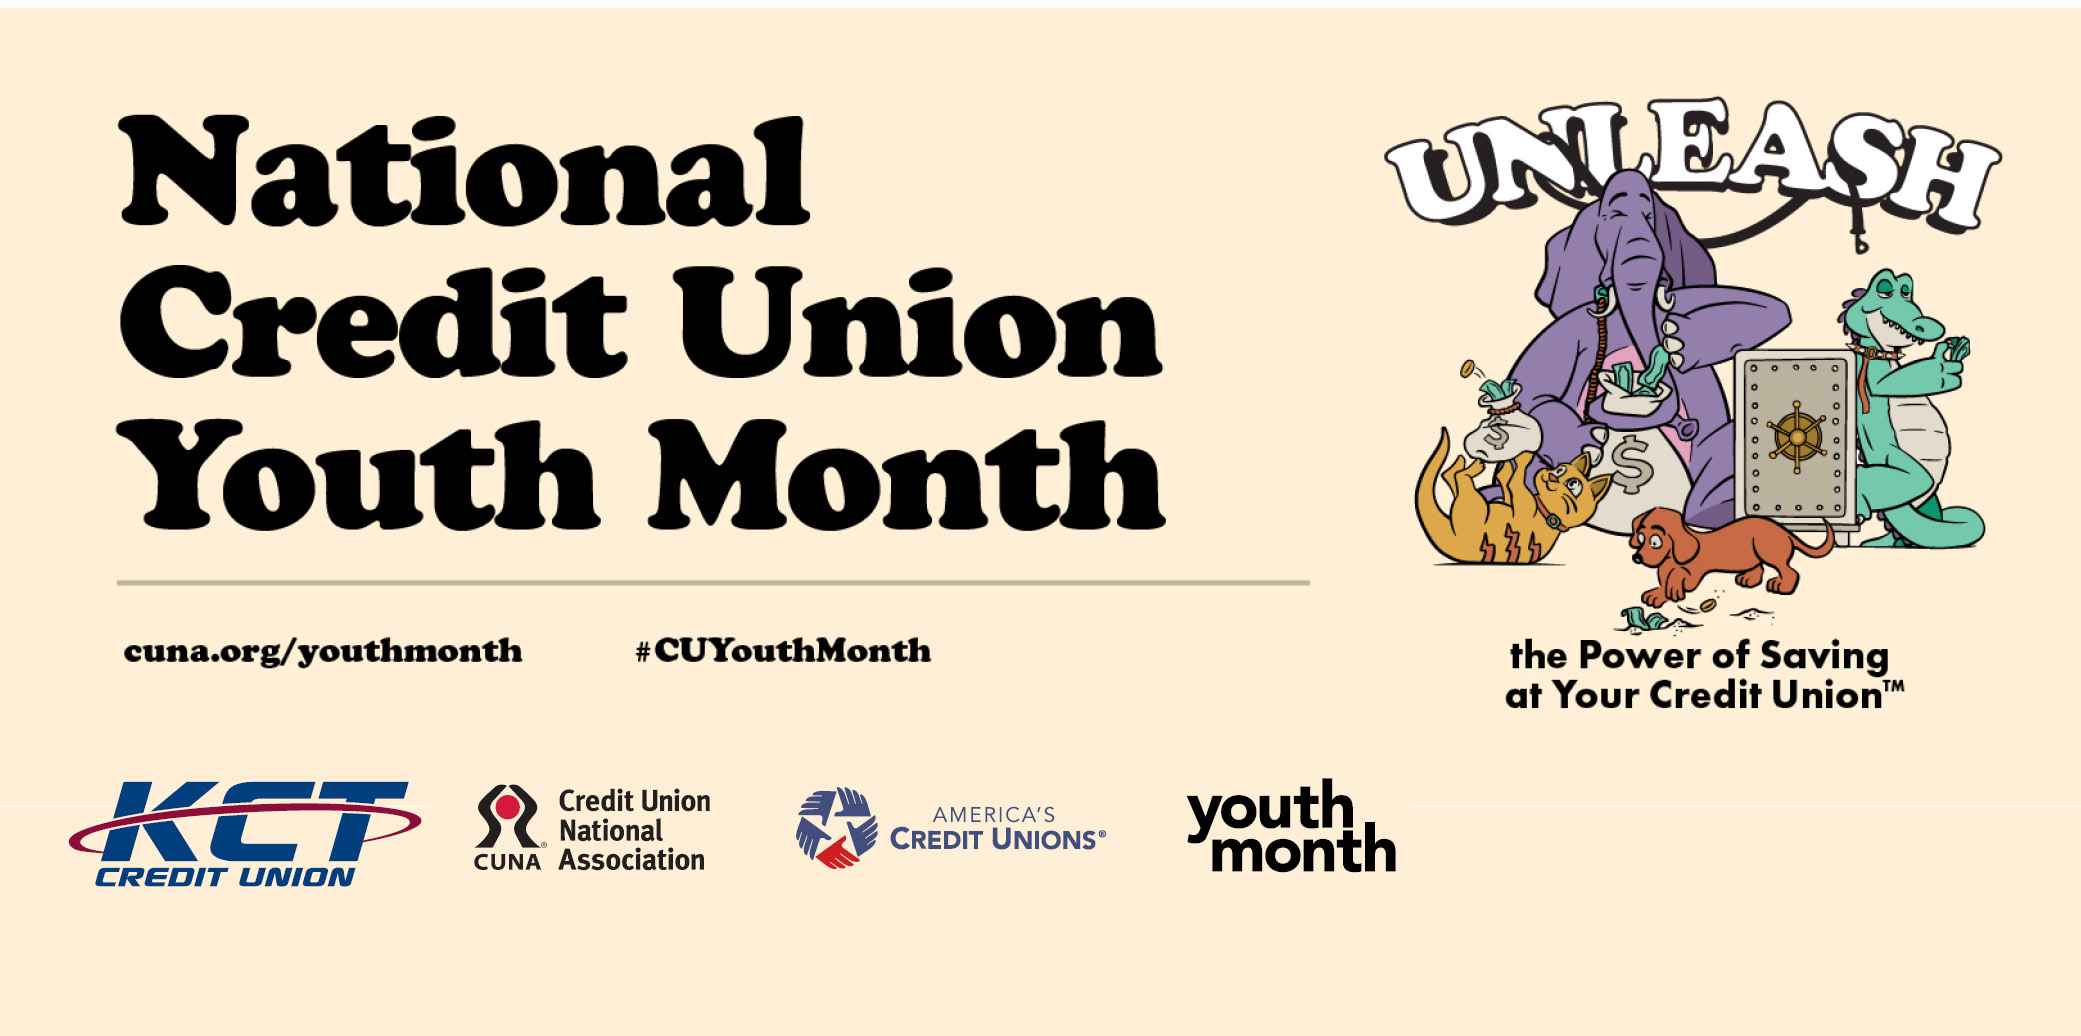 Celebrate National Credit Union Youth Month with KCT this April! 